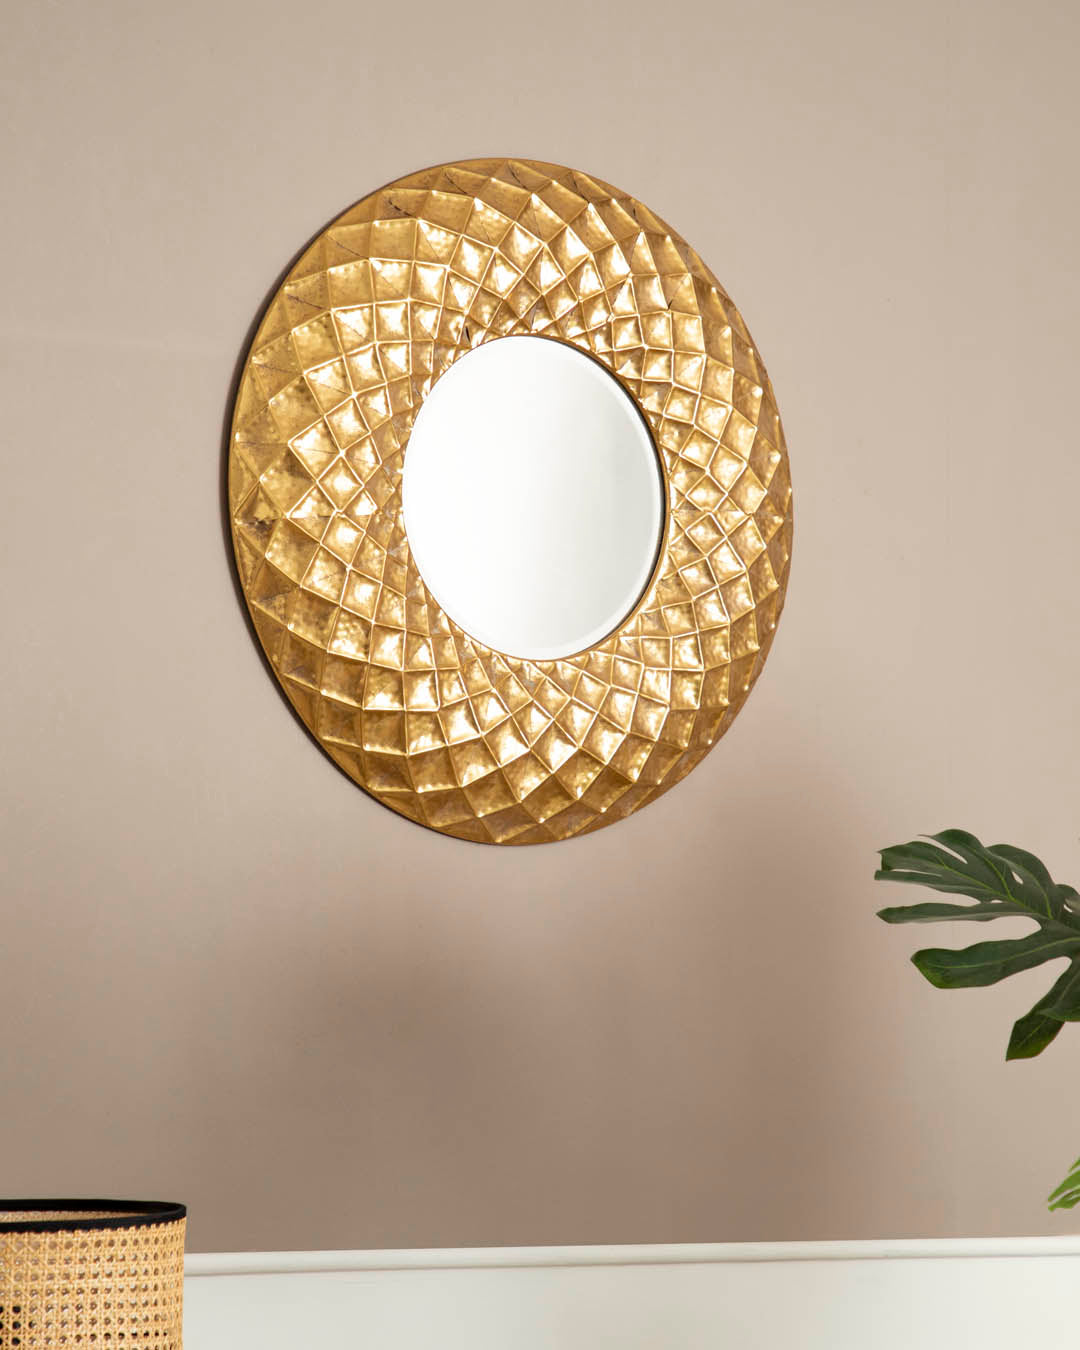 Fractal wall mirror with a geometric gold frame creating a dynamic look.